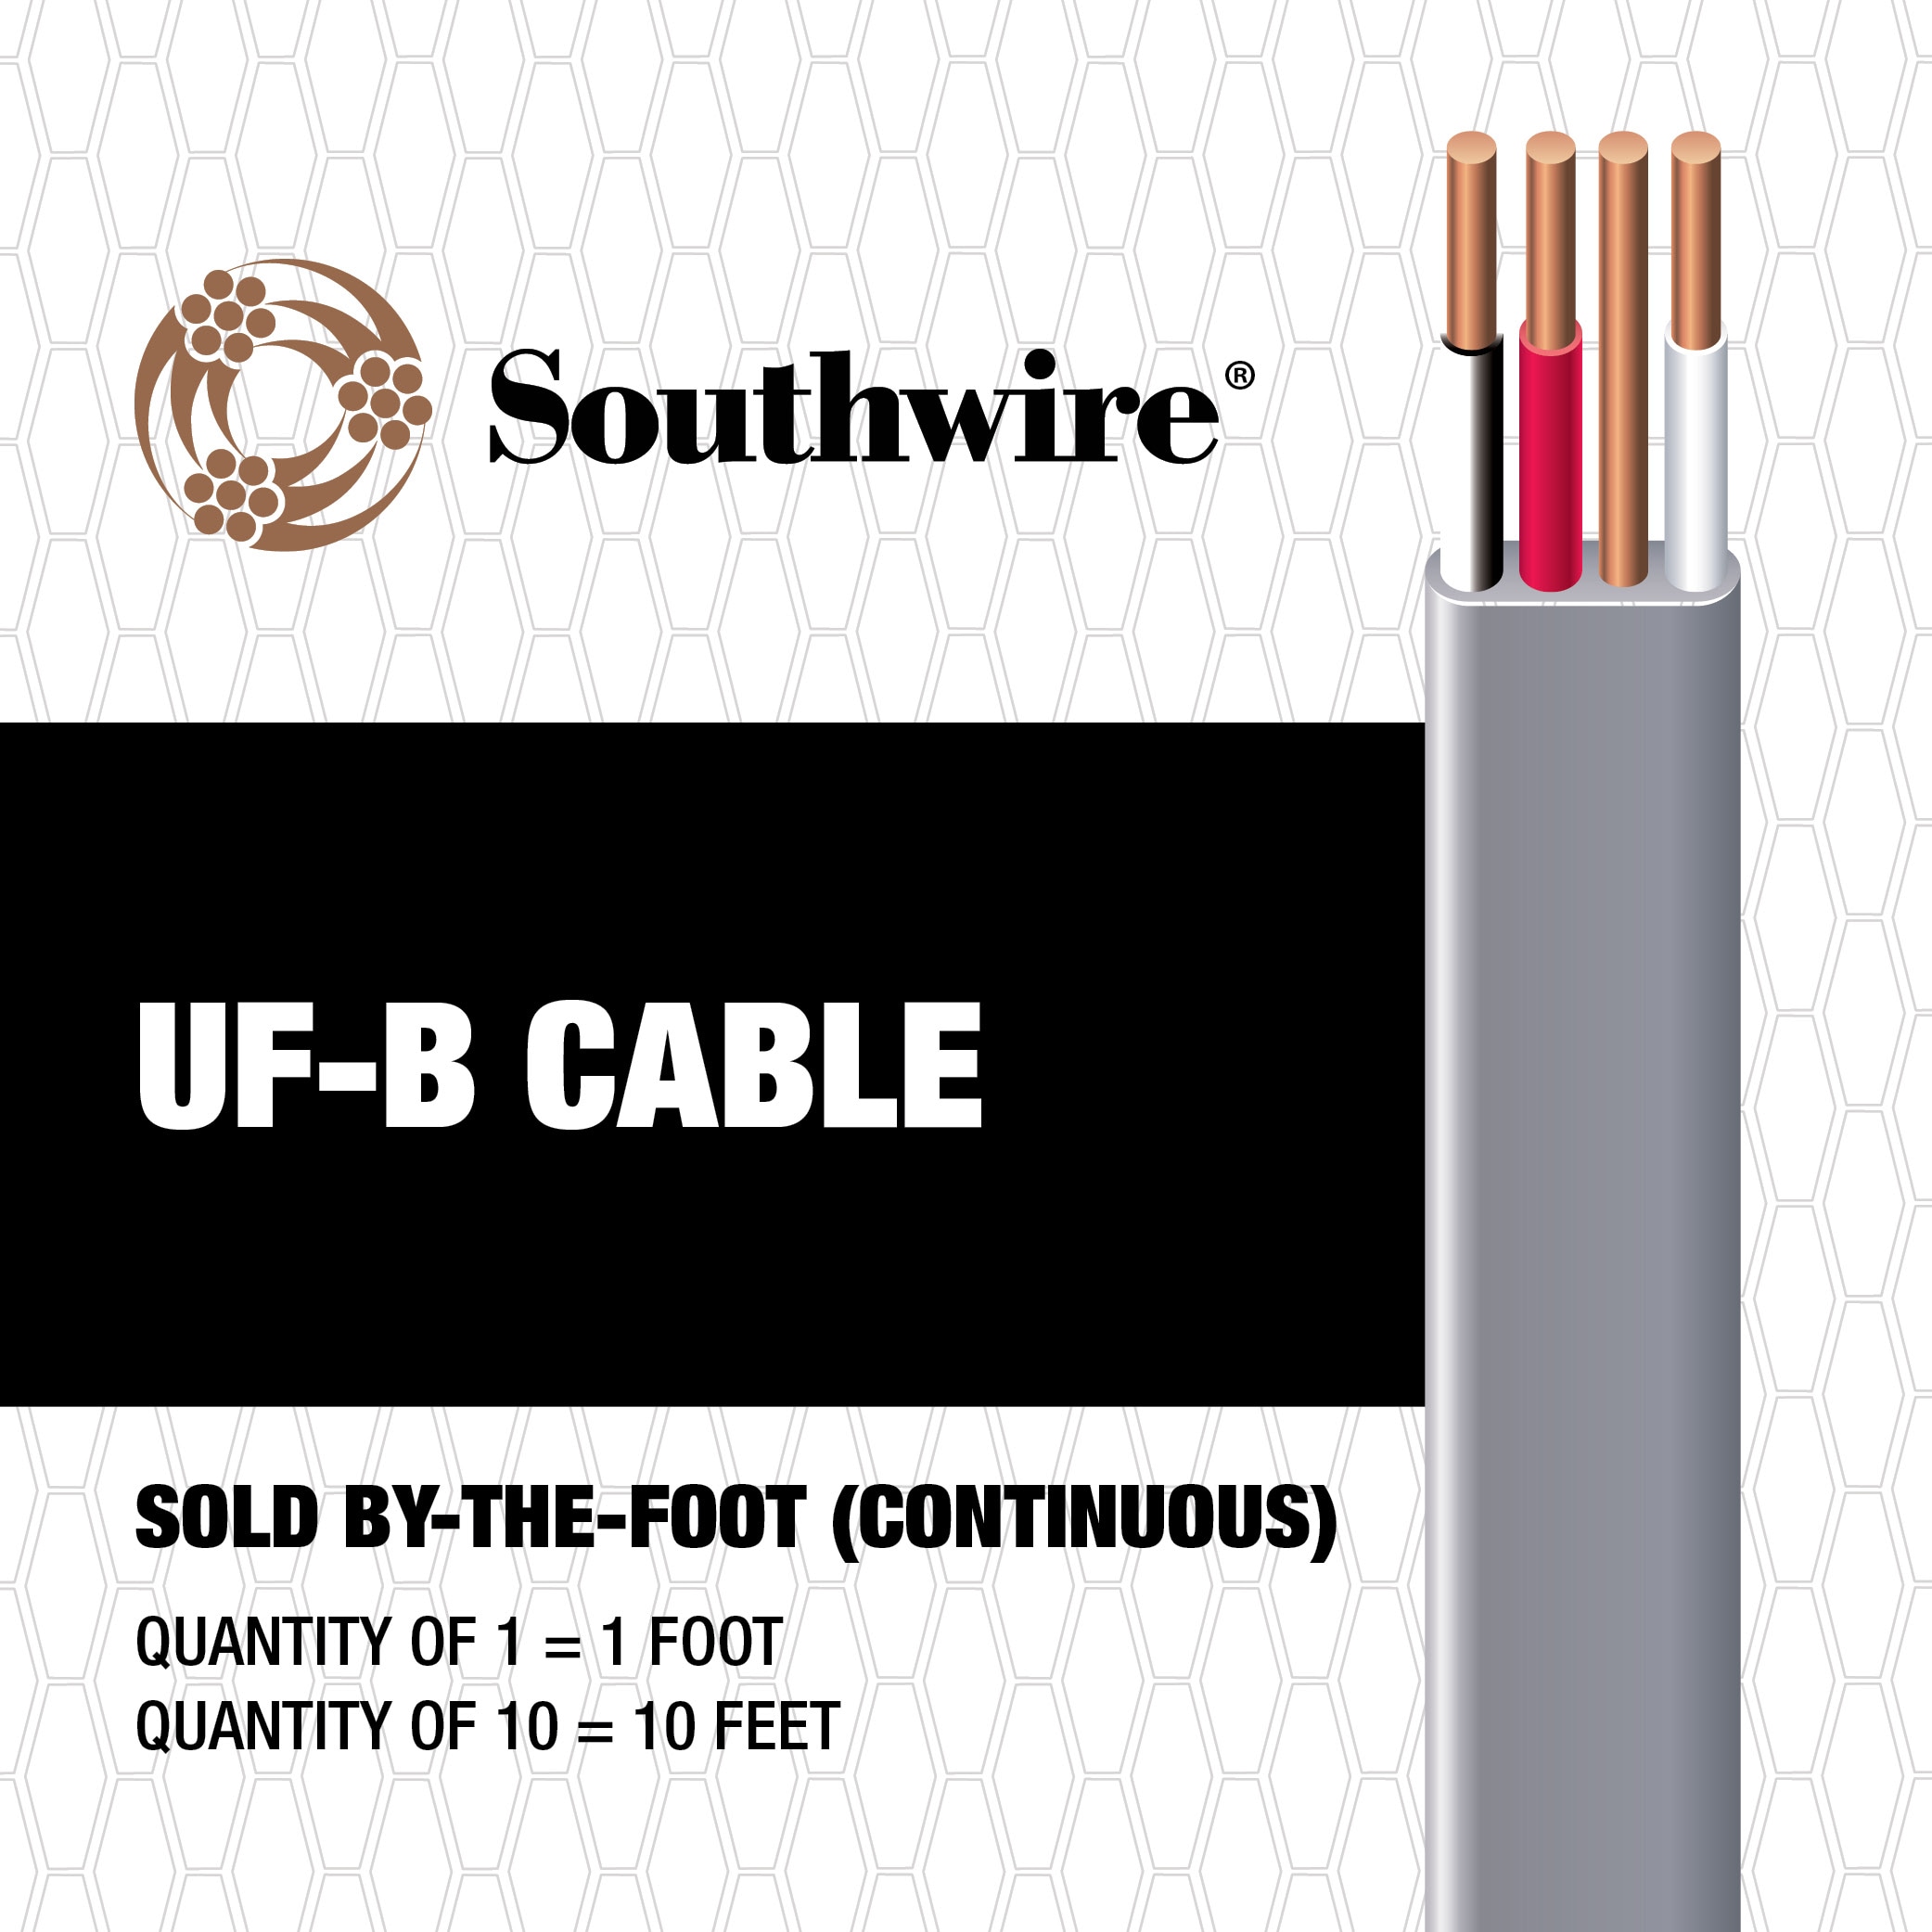 50 Feet 10/3 Type NM-B Copper #10 AWG, 3 Conductor with Ground. Insulated Jacket Orange